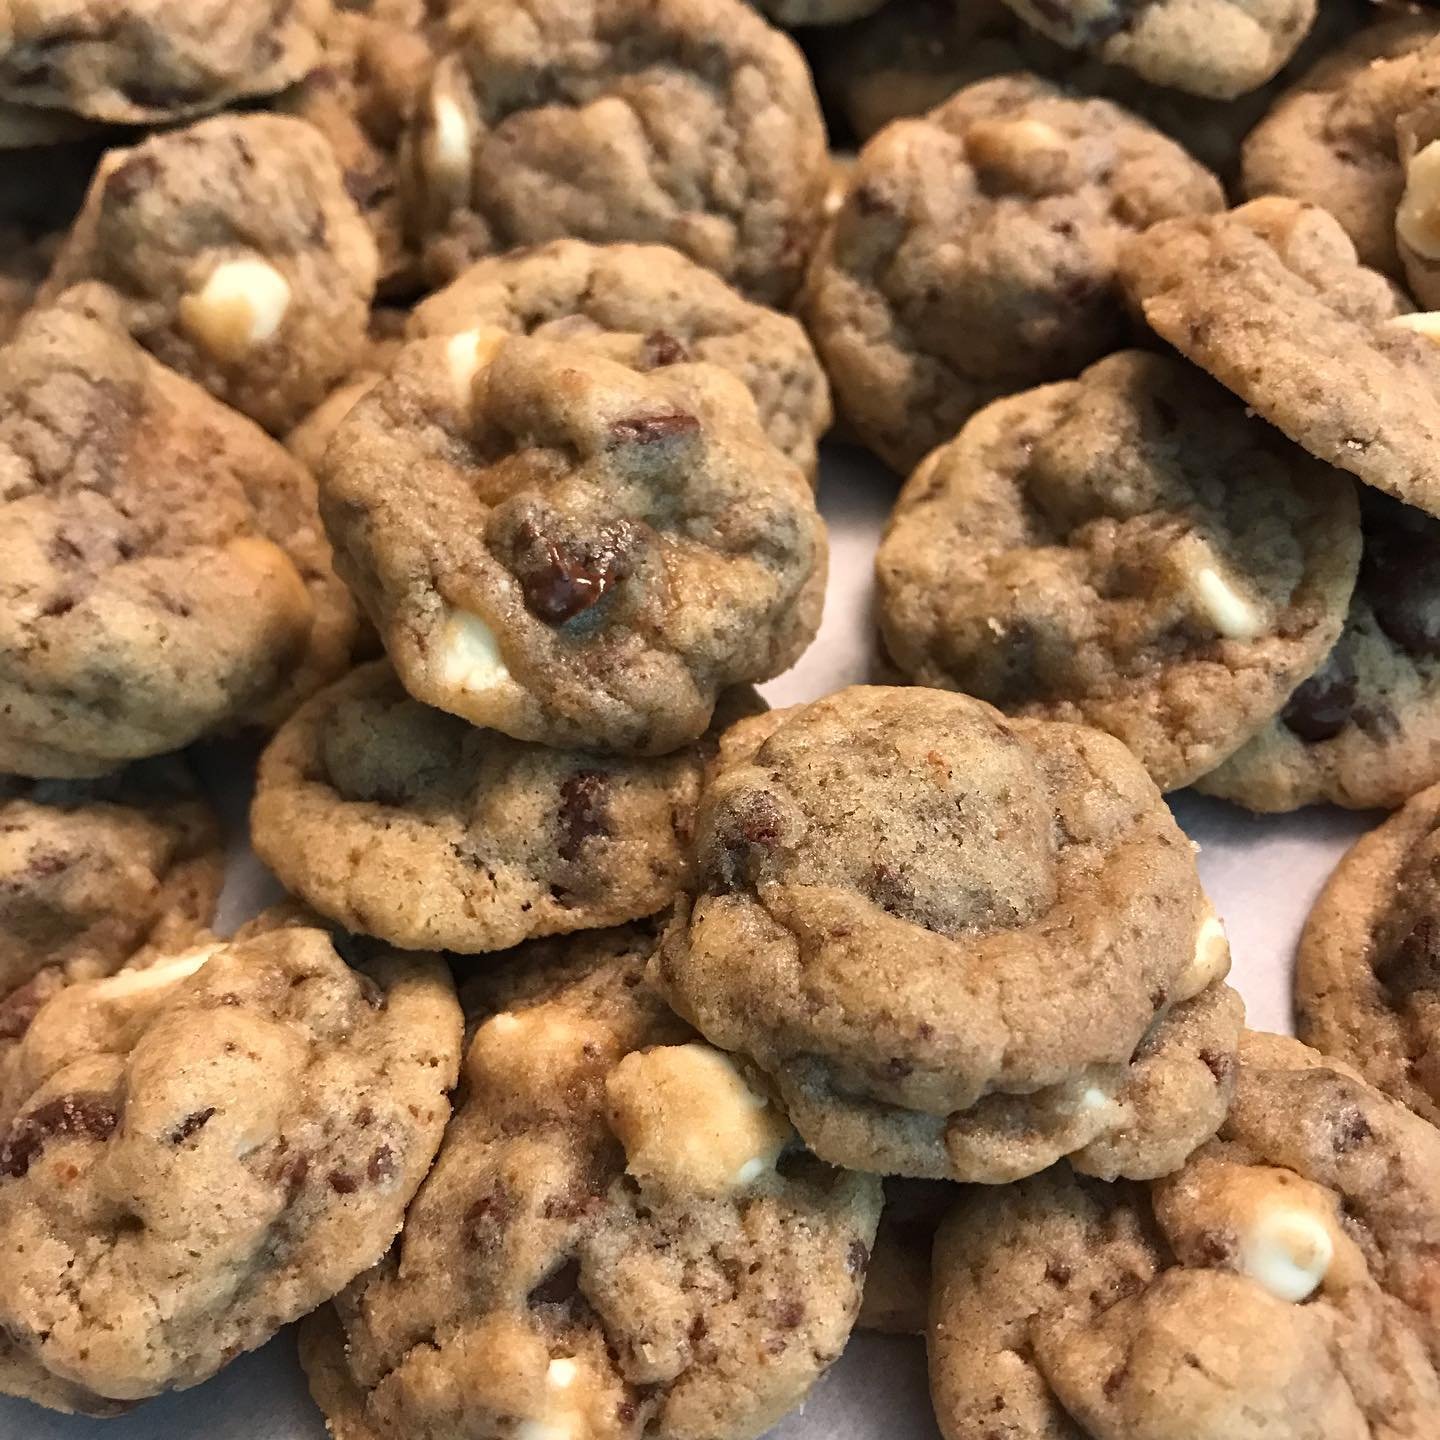 Mini White and Dark Chocolate Chip Cookies! 🍪 

#ivybakery #bakery #baked #cookies #chocolate #lasvegas #food #sweets #eatthis